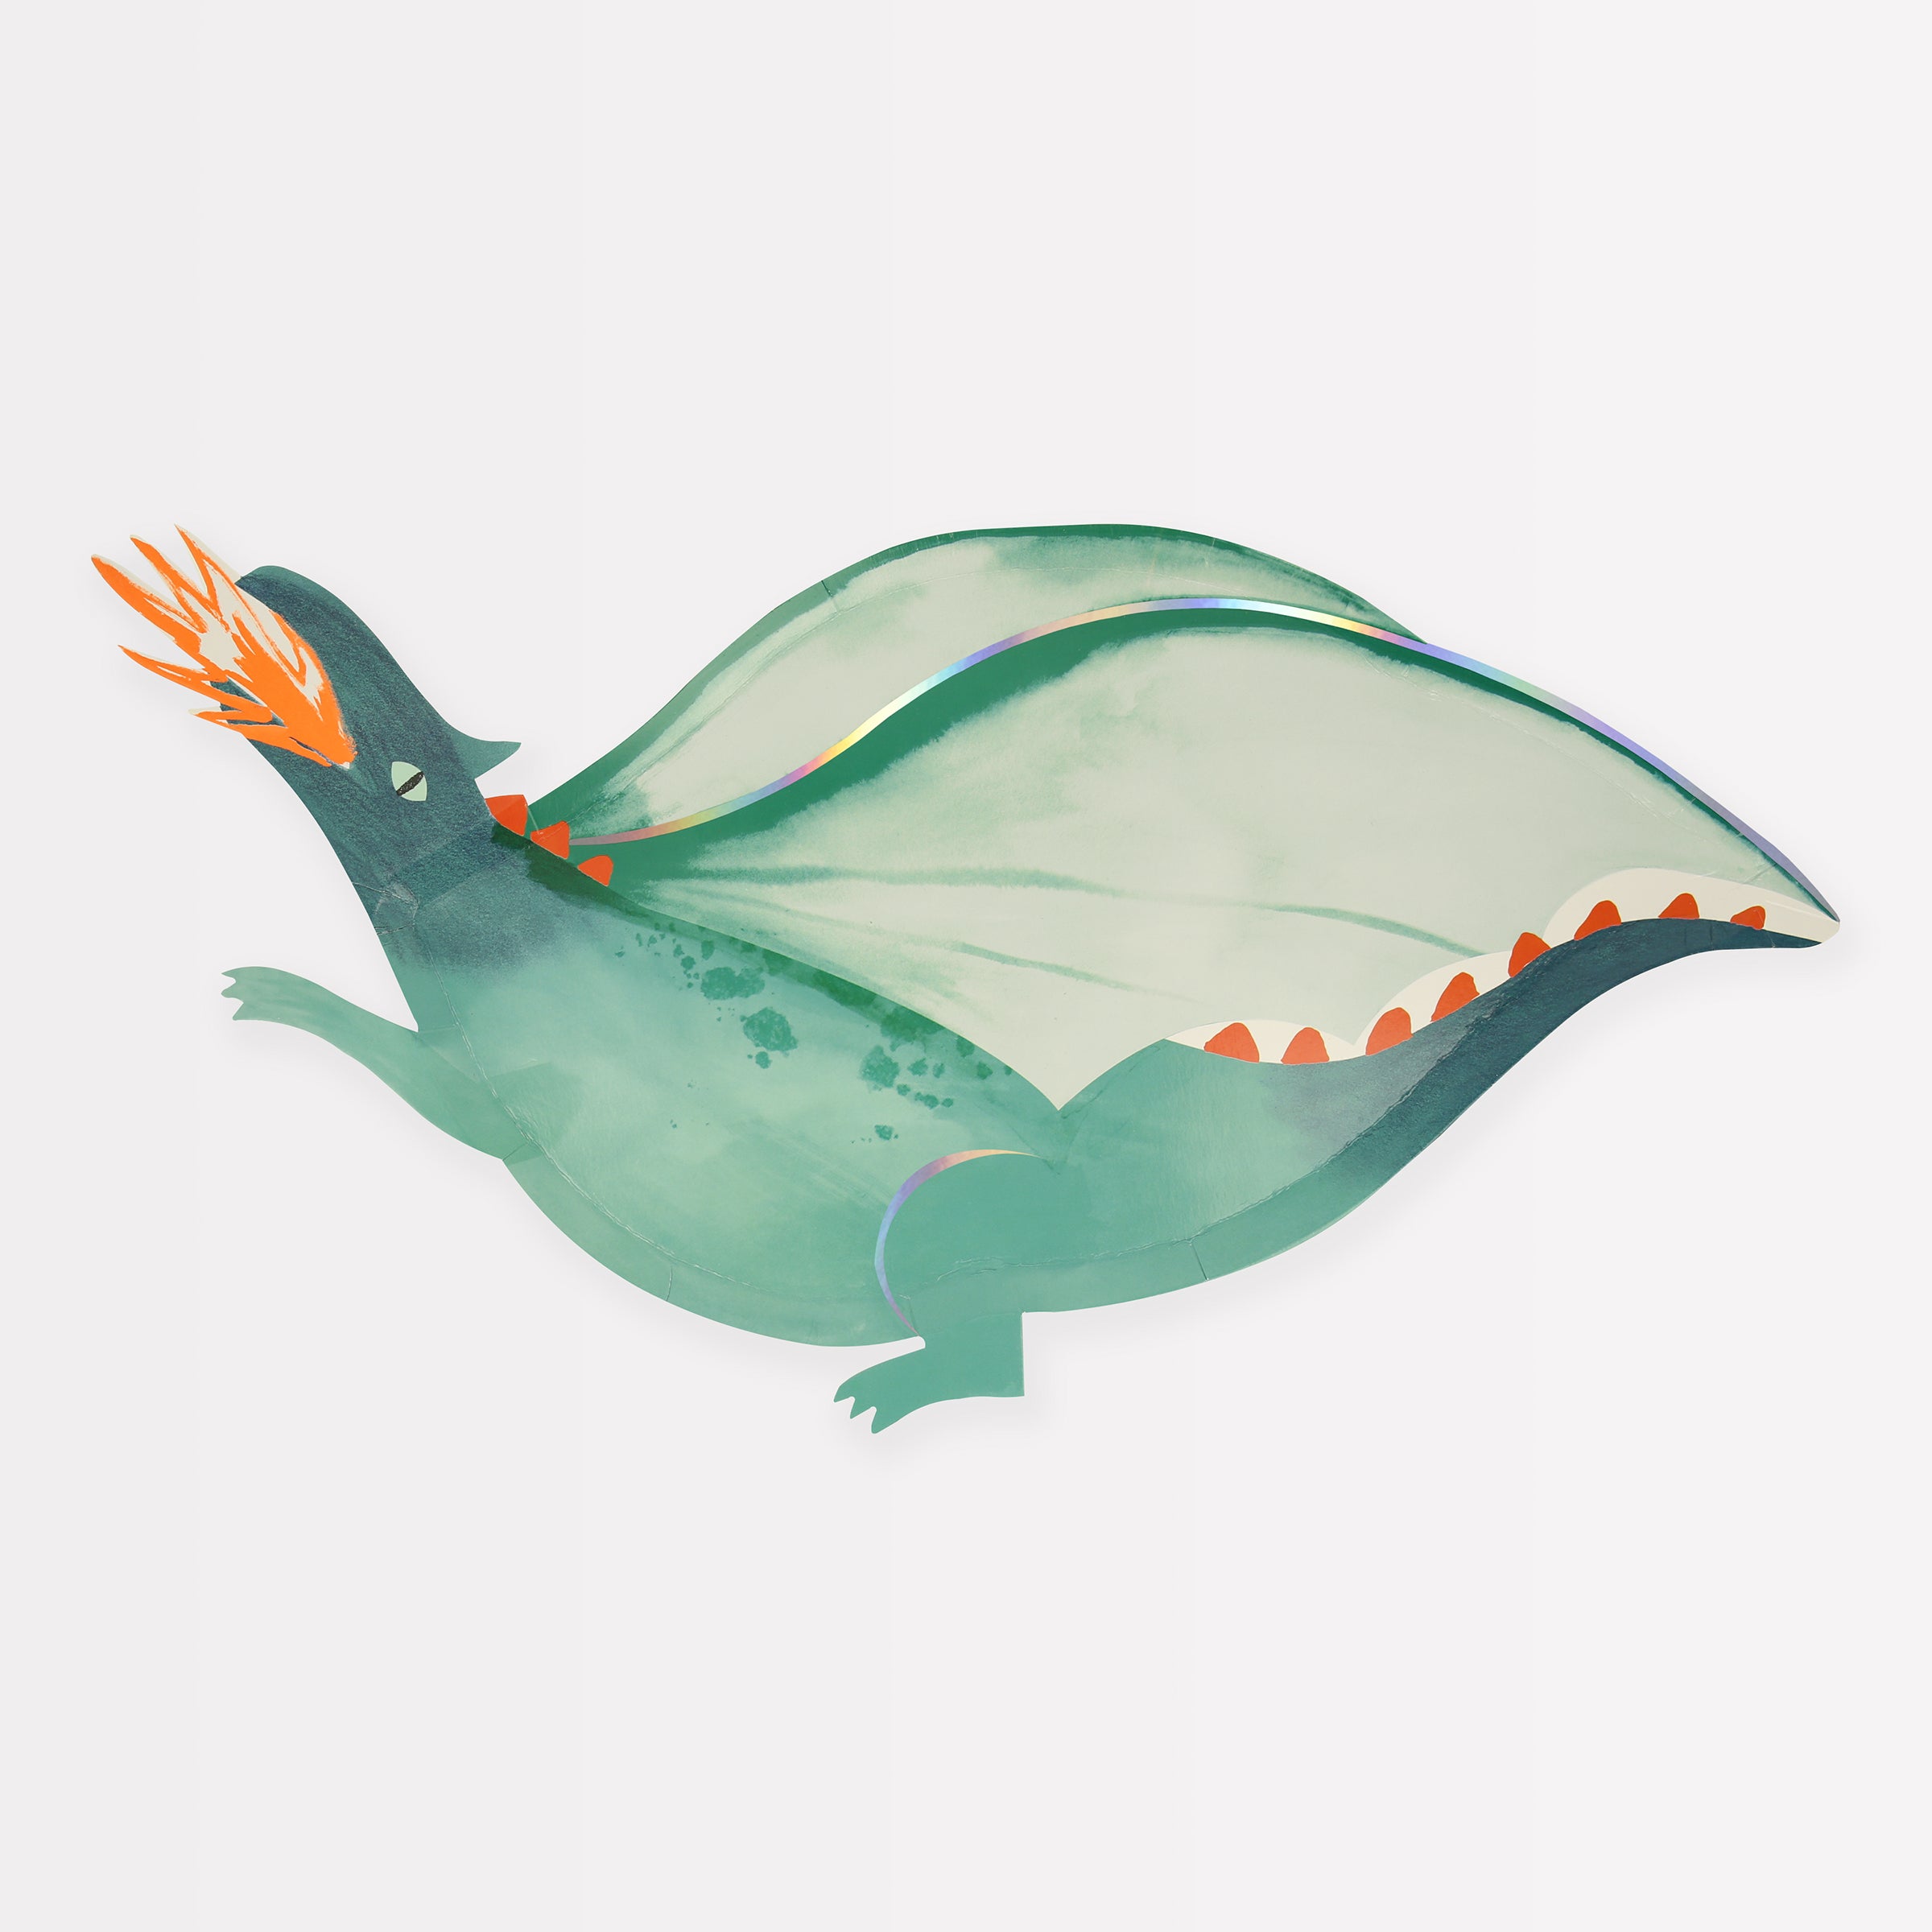 Our paper plates, in the shape of dragons, are ideal for a dragon party.